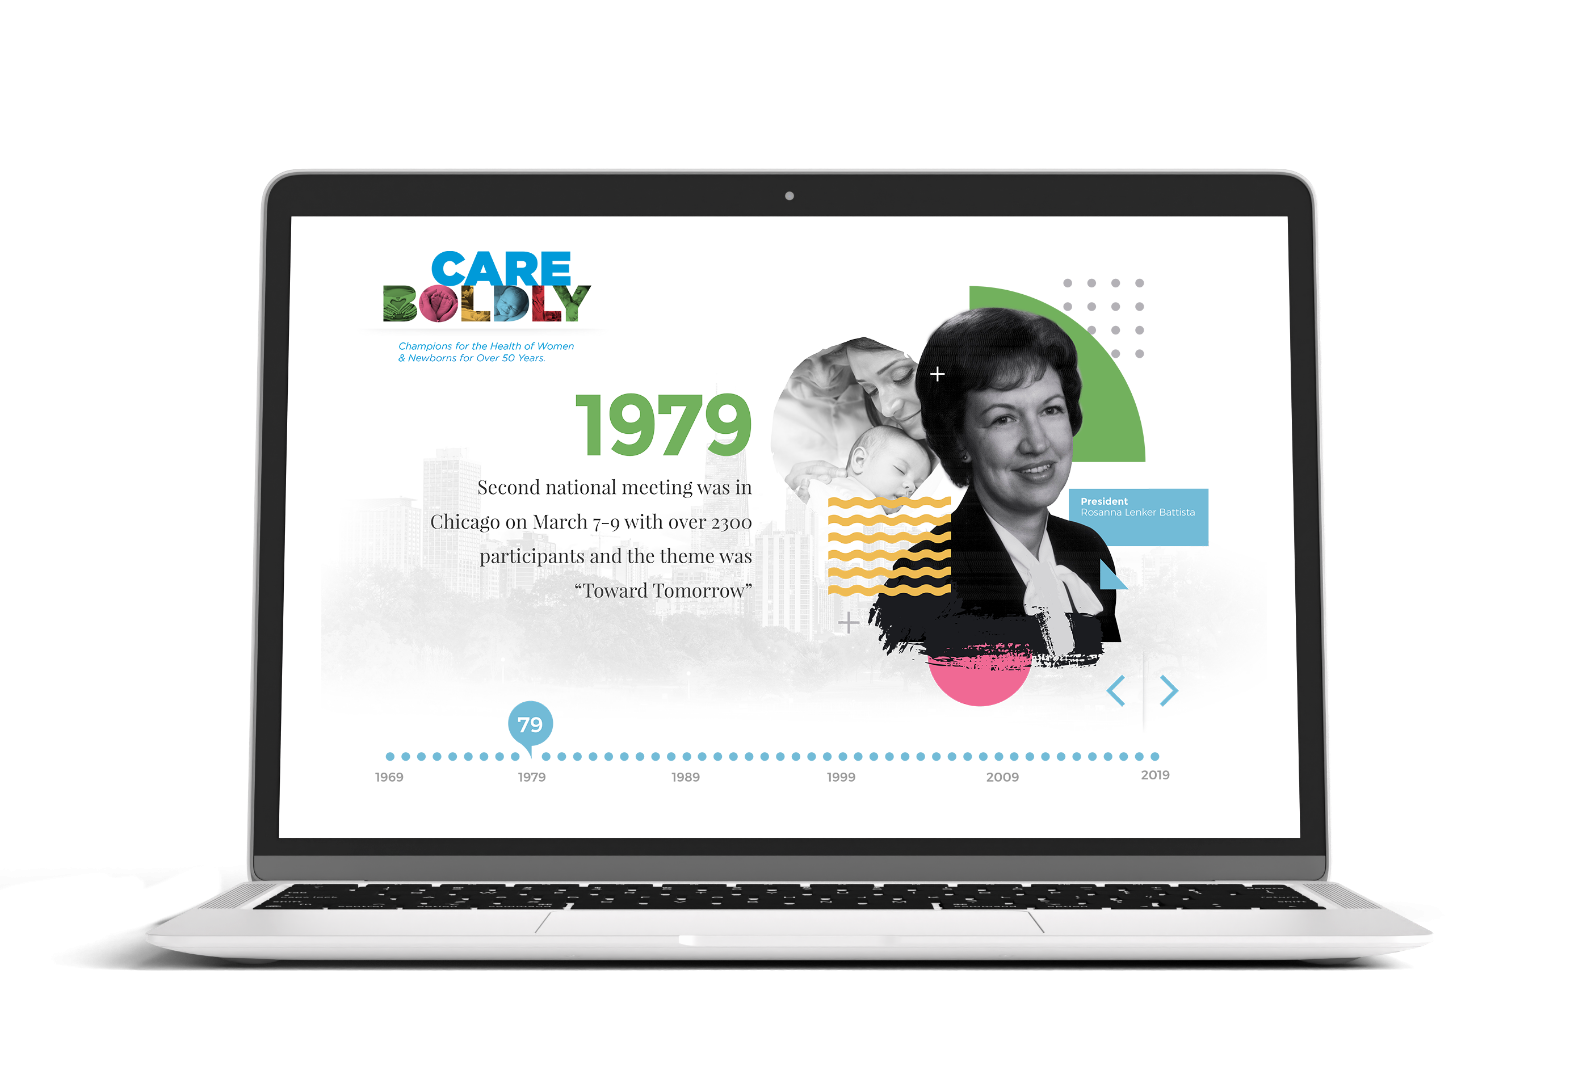 This laptop screen displays a graphic timeline for AWHONN's 50th Anniversary campaign, marking a significant historical event from 1979 with related imagery and text.